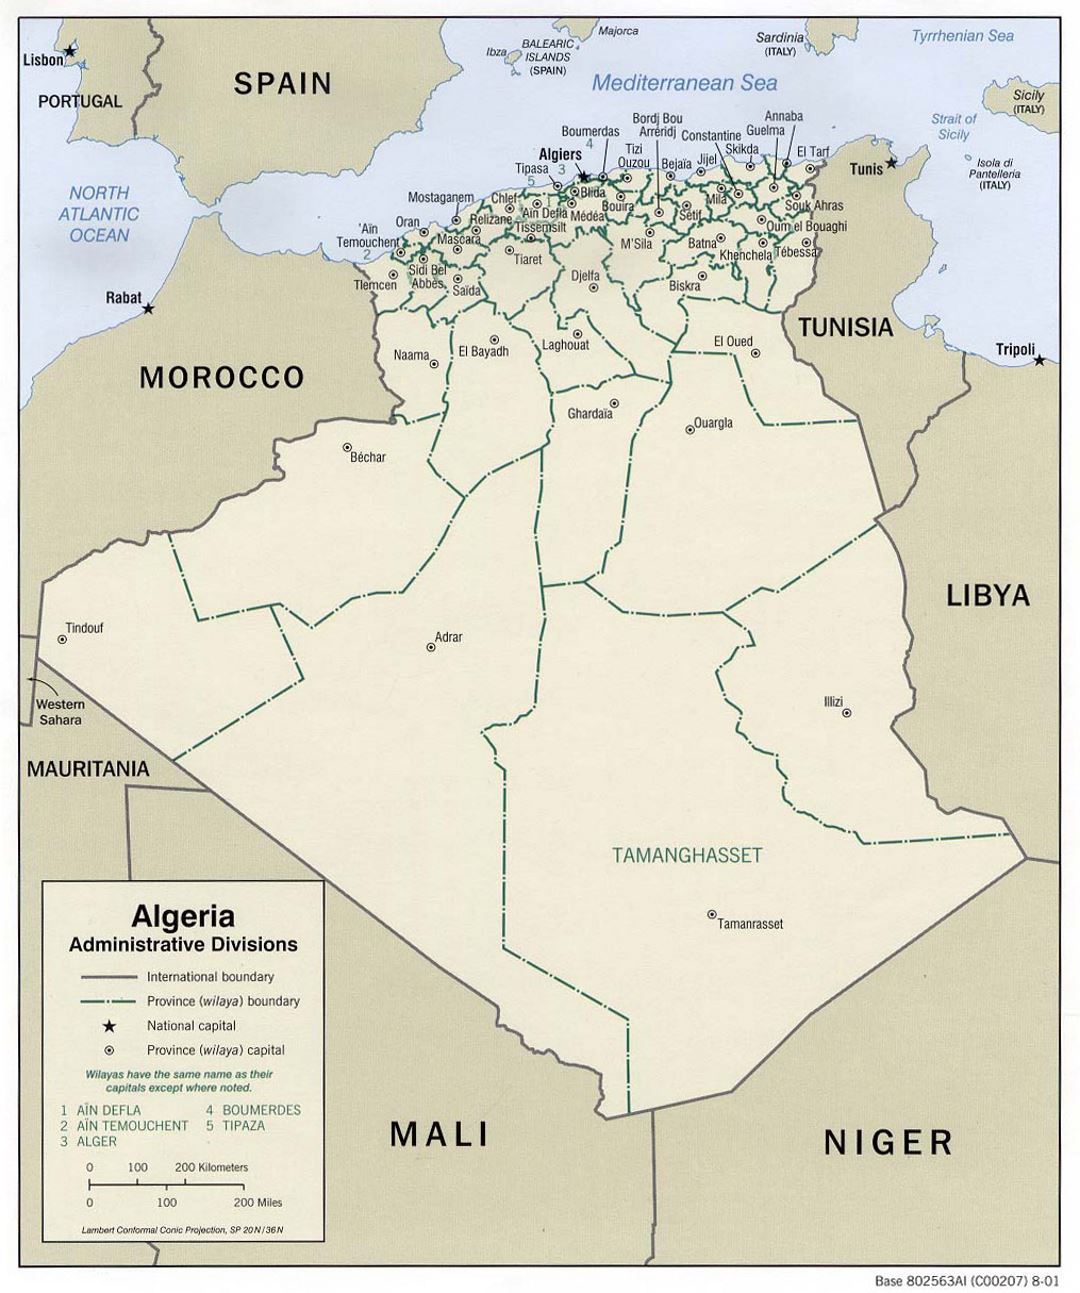 Detailed administrative divisions map of Algeria - 2001